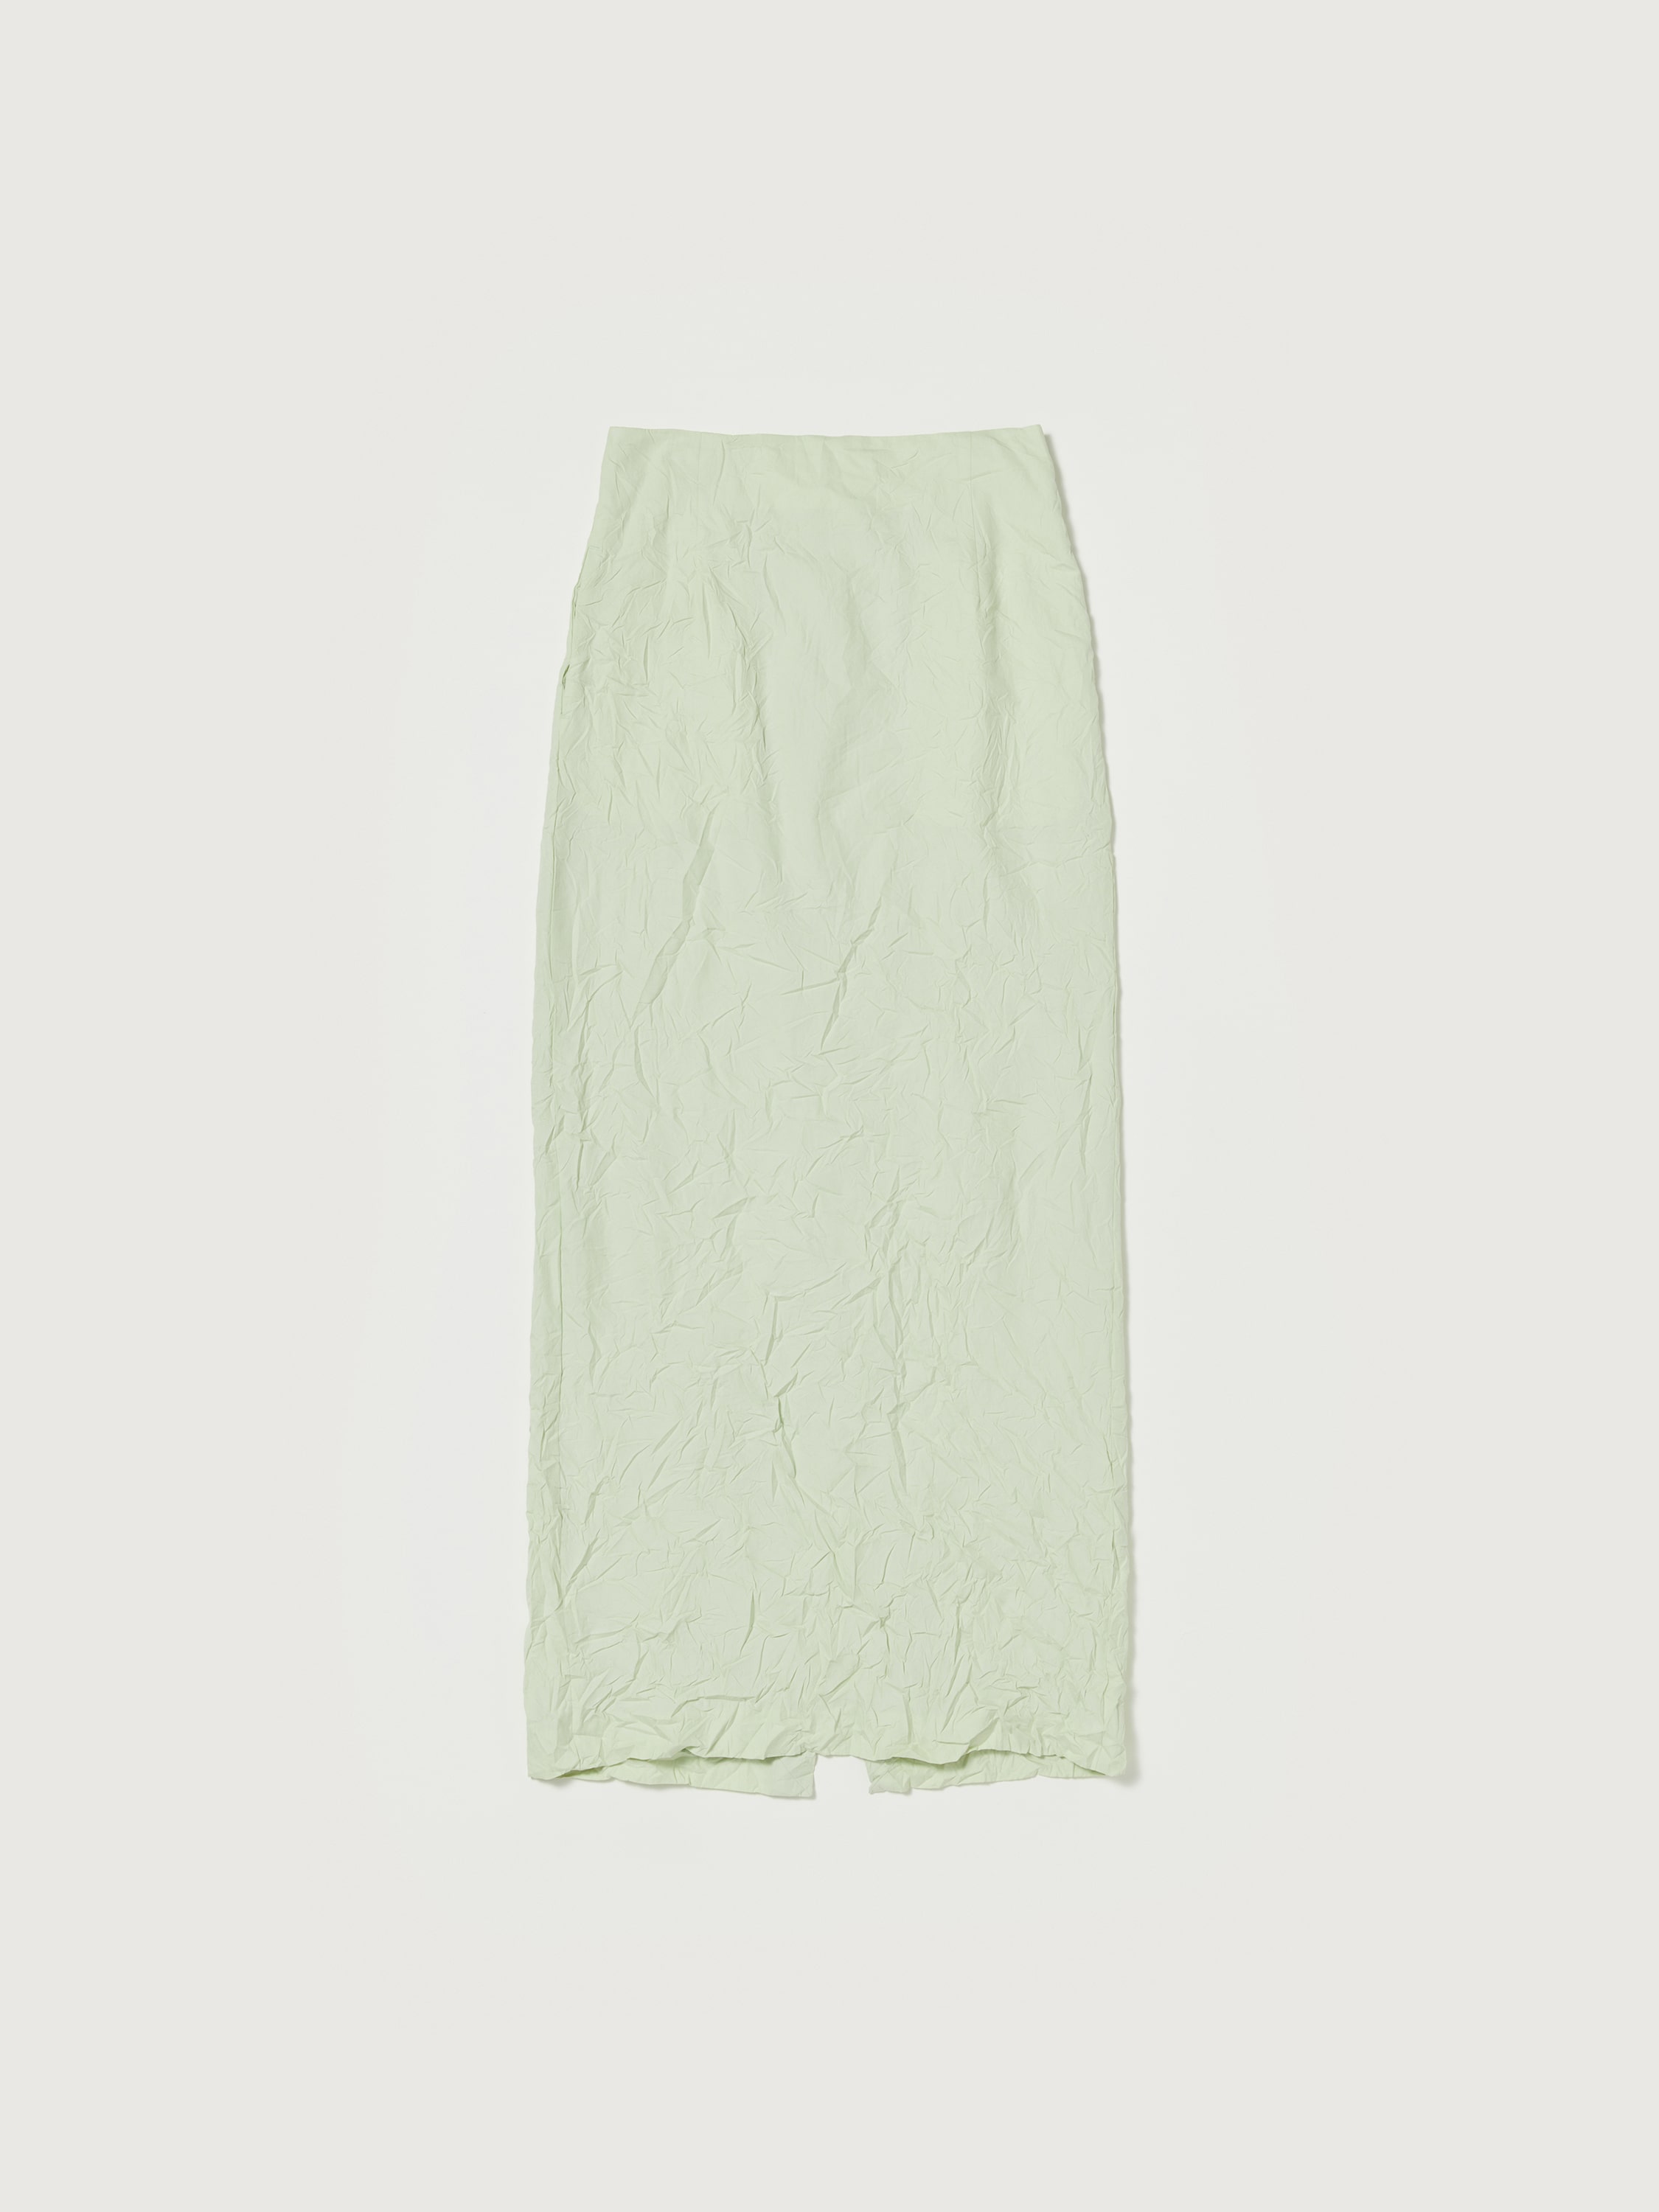 WRINKLED WASHED FINX TWILL SKIRT 詳細画像 LIGHT GREEN 1